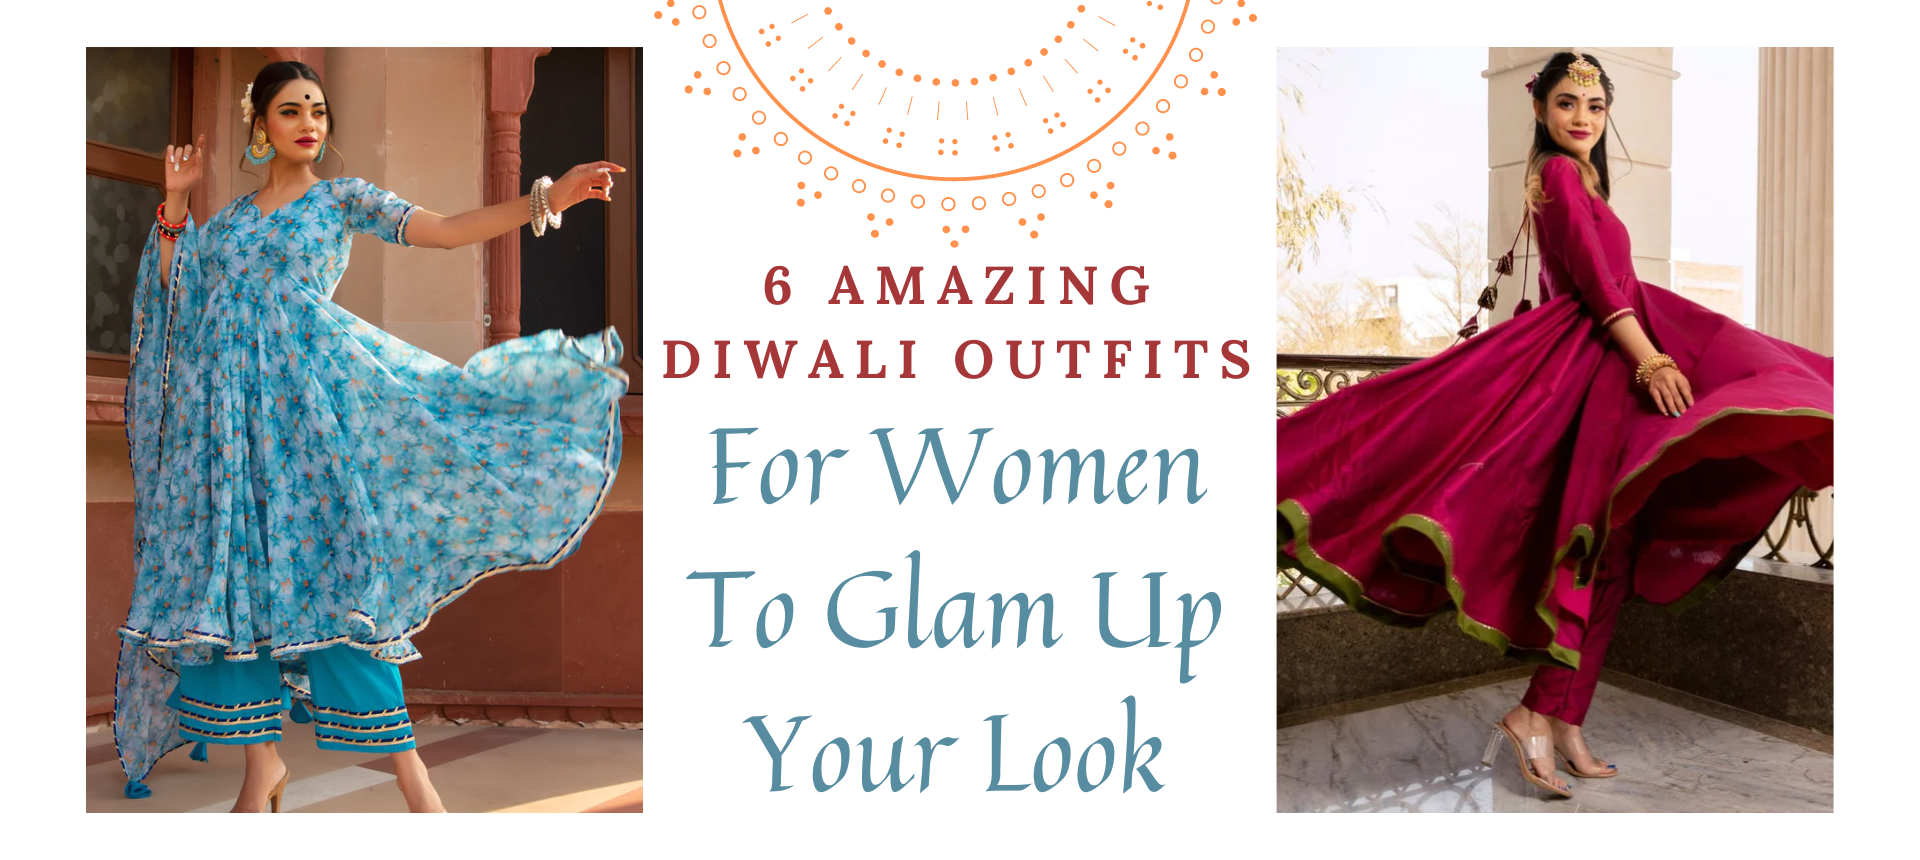 6 Amazing Diwali Outfits For Women To Glam Up Your Look